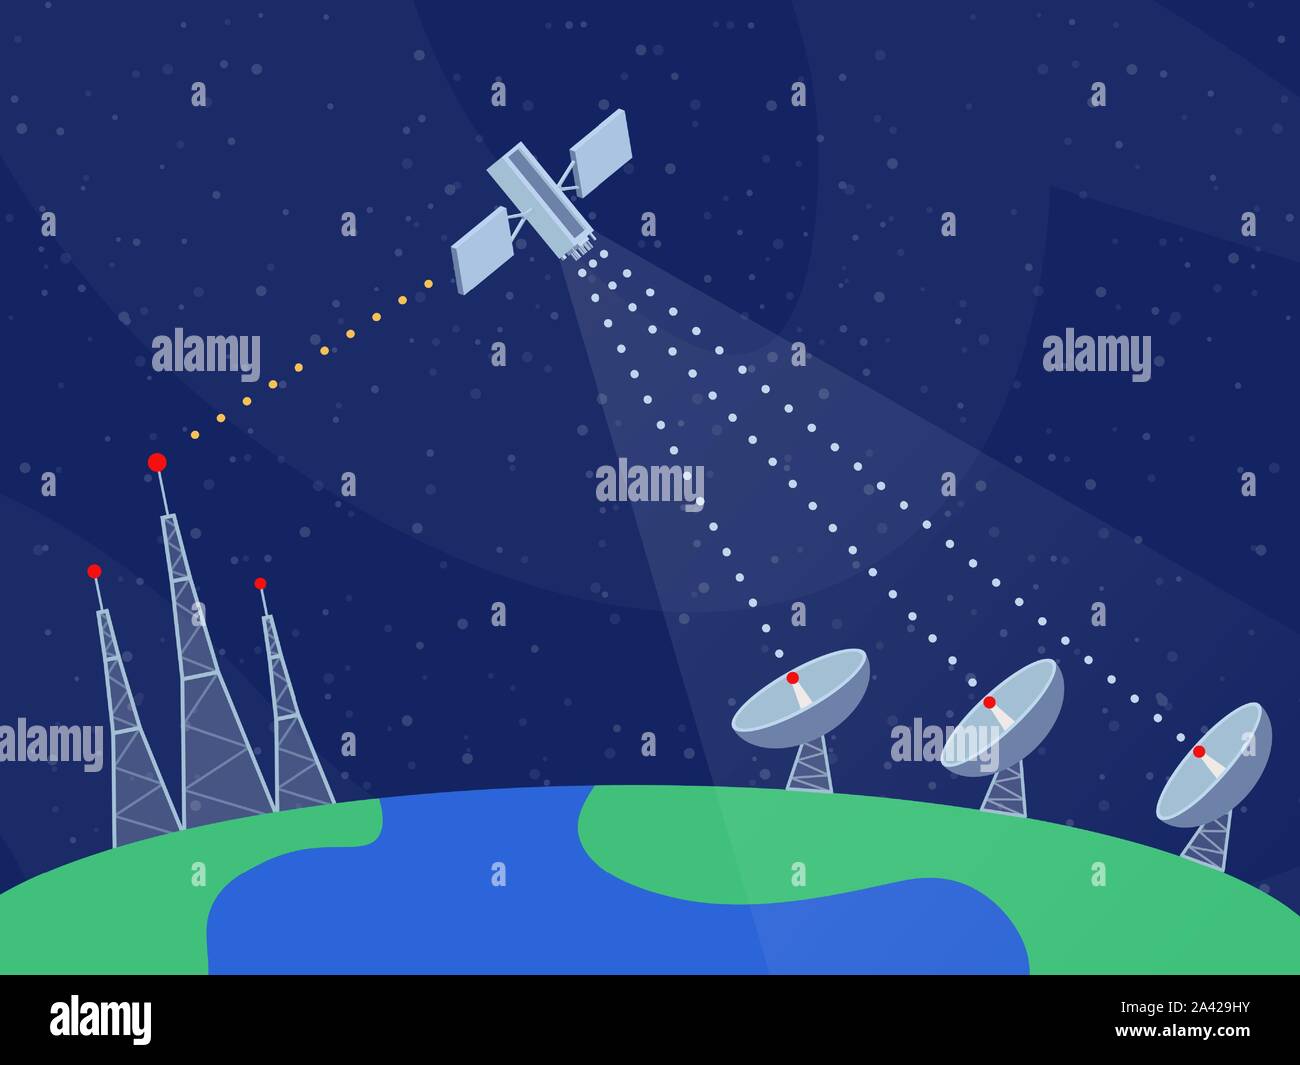 Modern communication technology flat vector illustration. Global information network, worldwide navigation system cartoon concept. Broadcasting equipment, satellite, radar dishes and radio towers Stock Vector